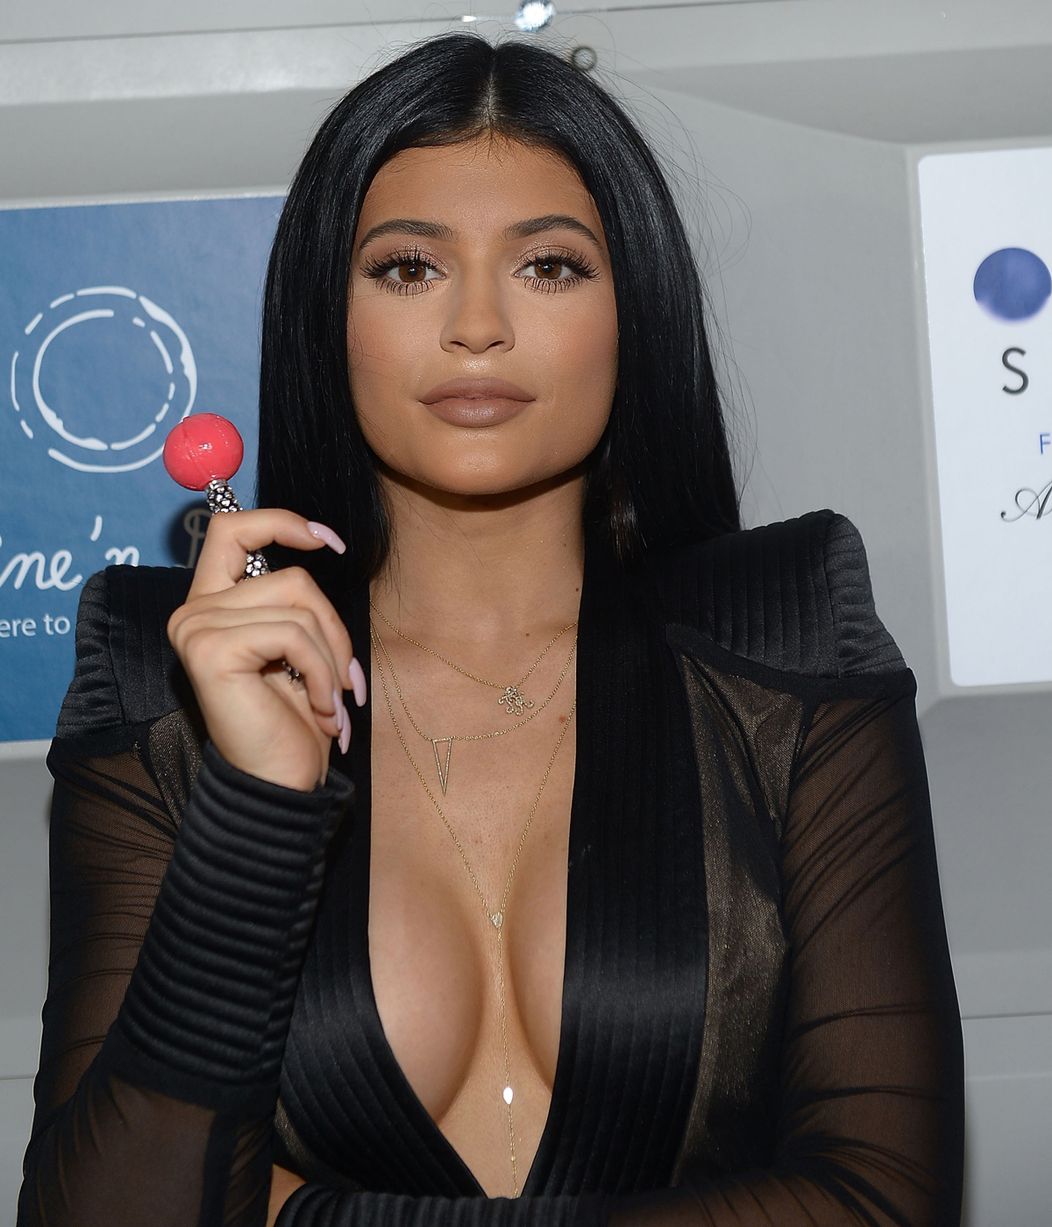 Kylie-Jenner-attends-the-Sugar-Factory-opening.jpg